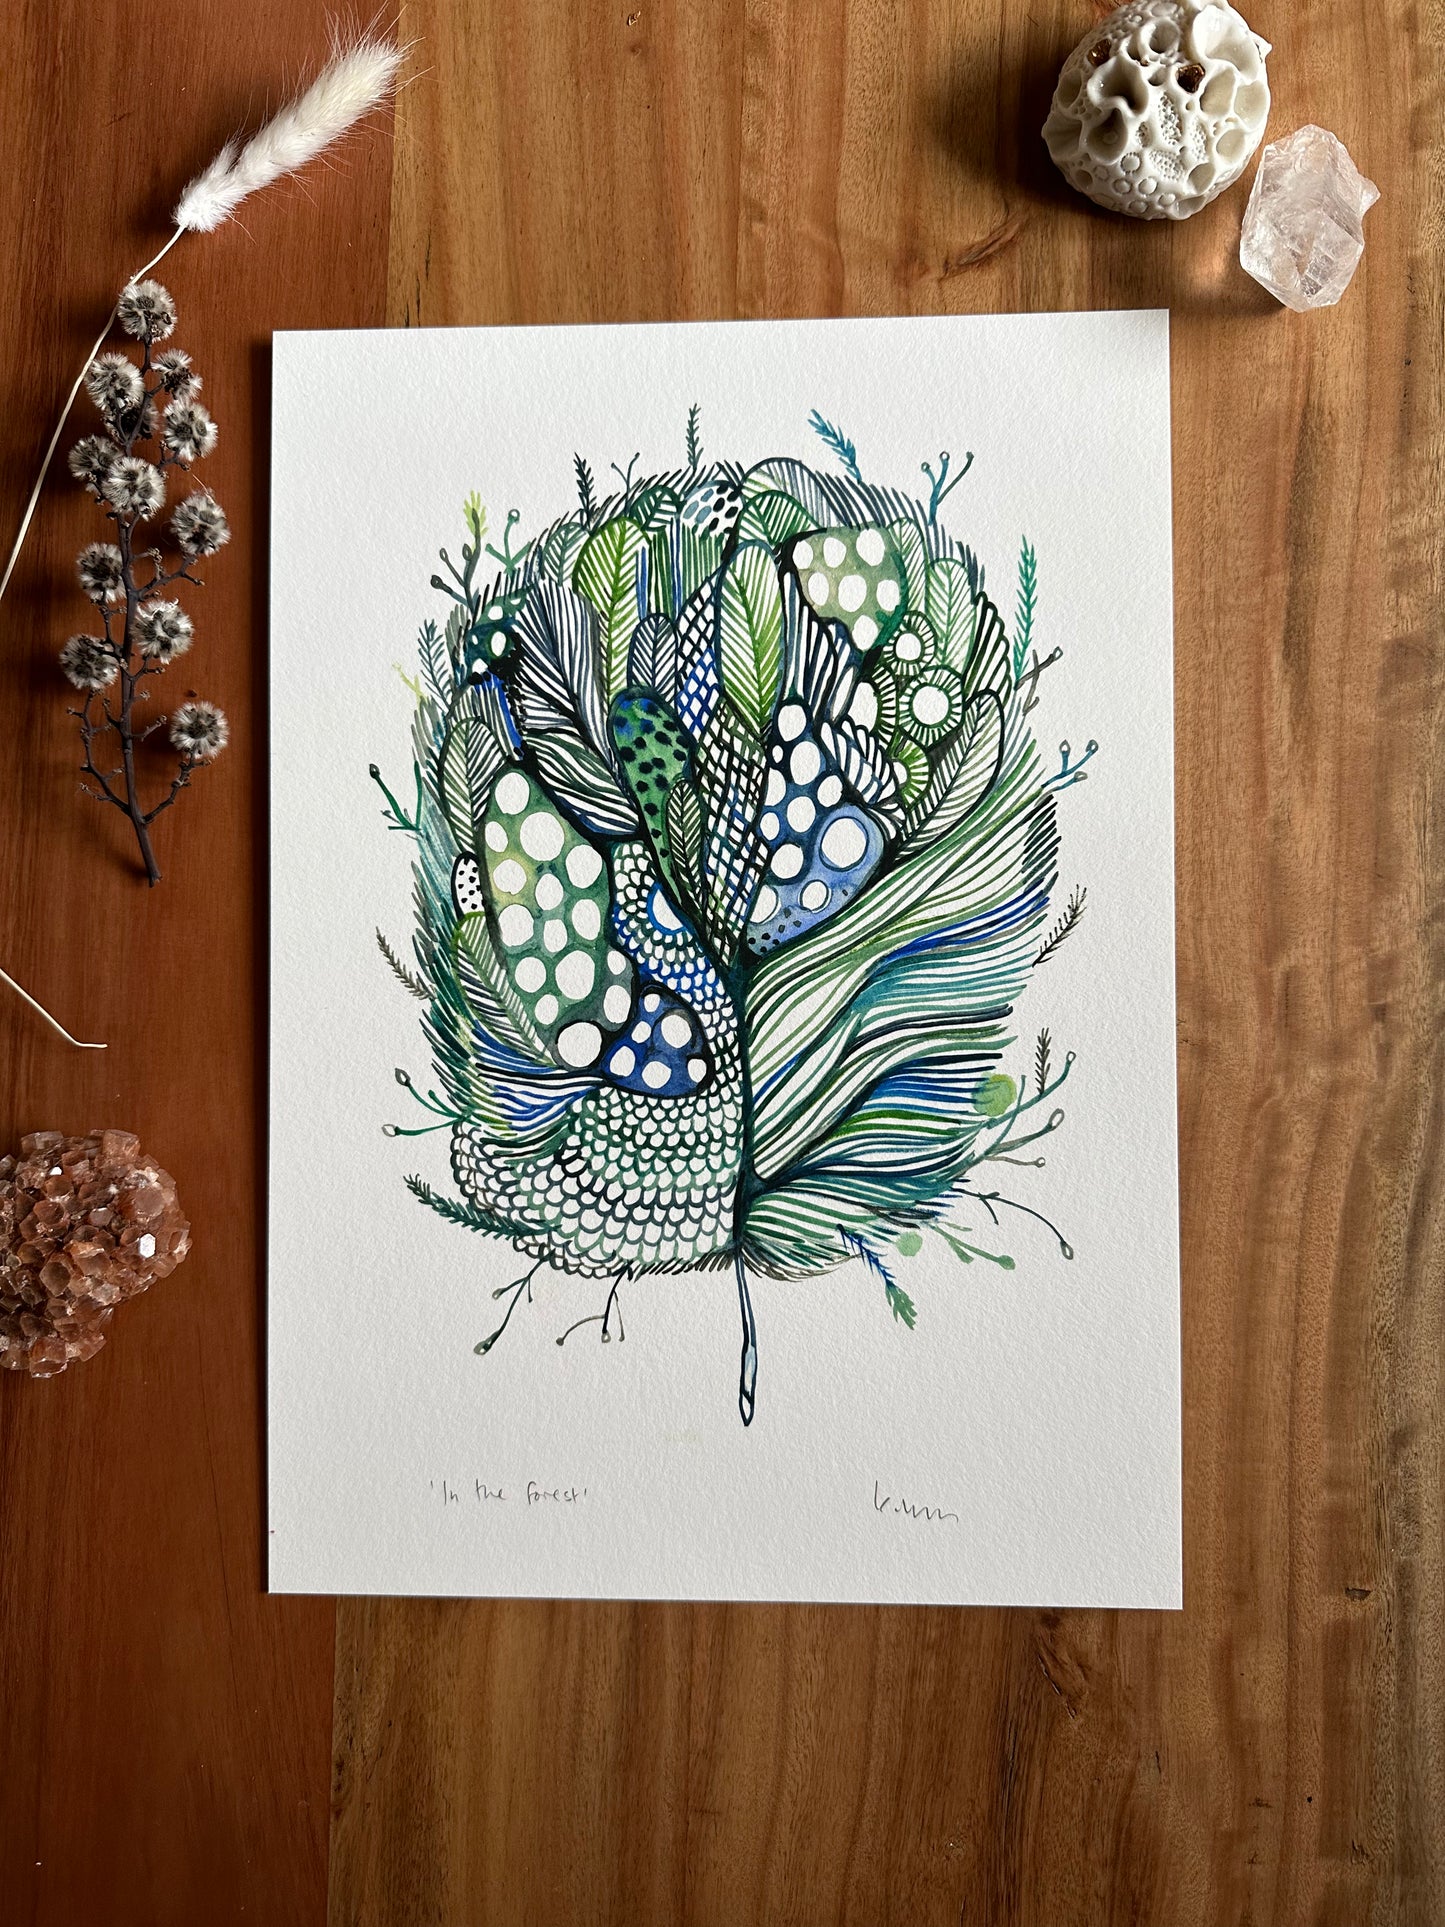 ‘In the forest’ giclee print in A3, A4 or a5